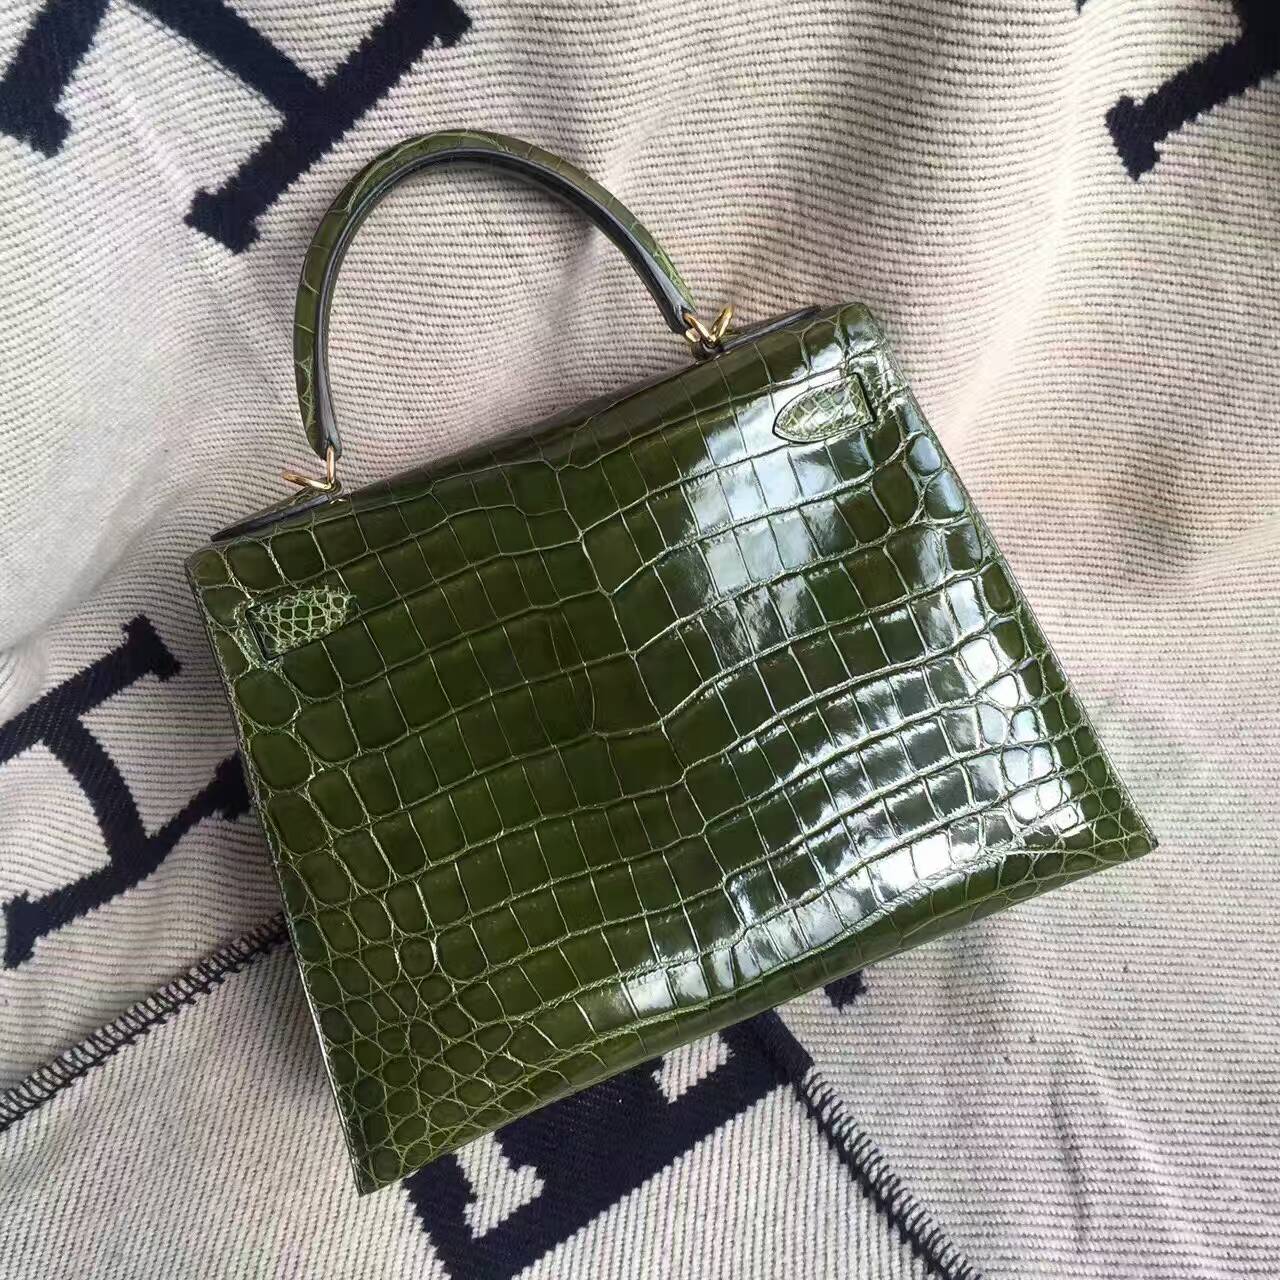 New Arrival Hermes Canopee Green Crocodile Shiny Leather Sellier Kelly Bag28CM